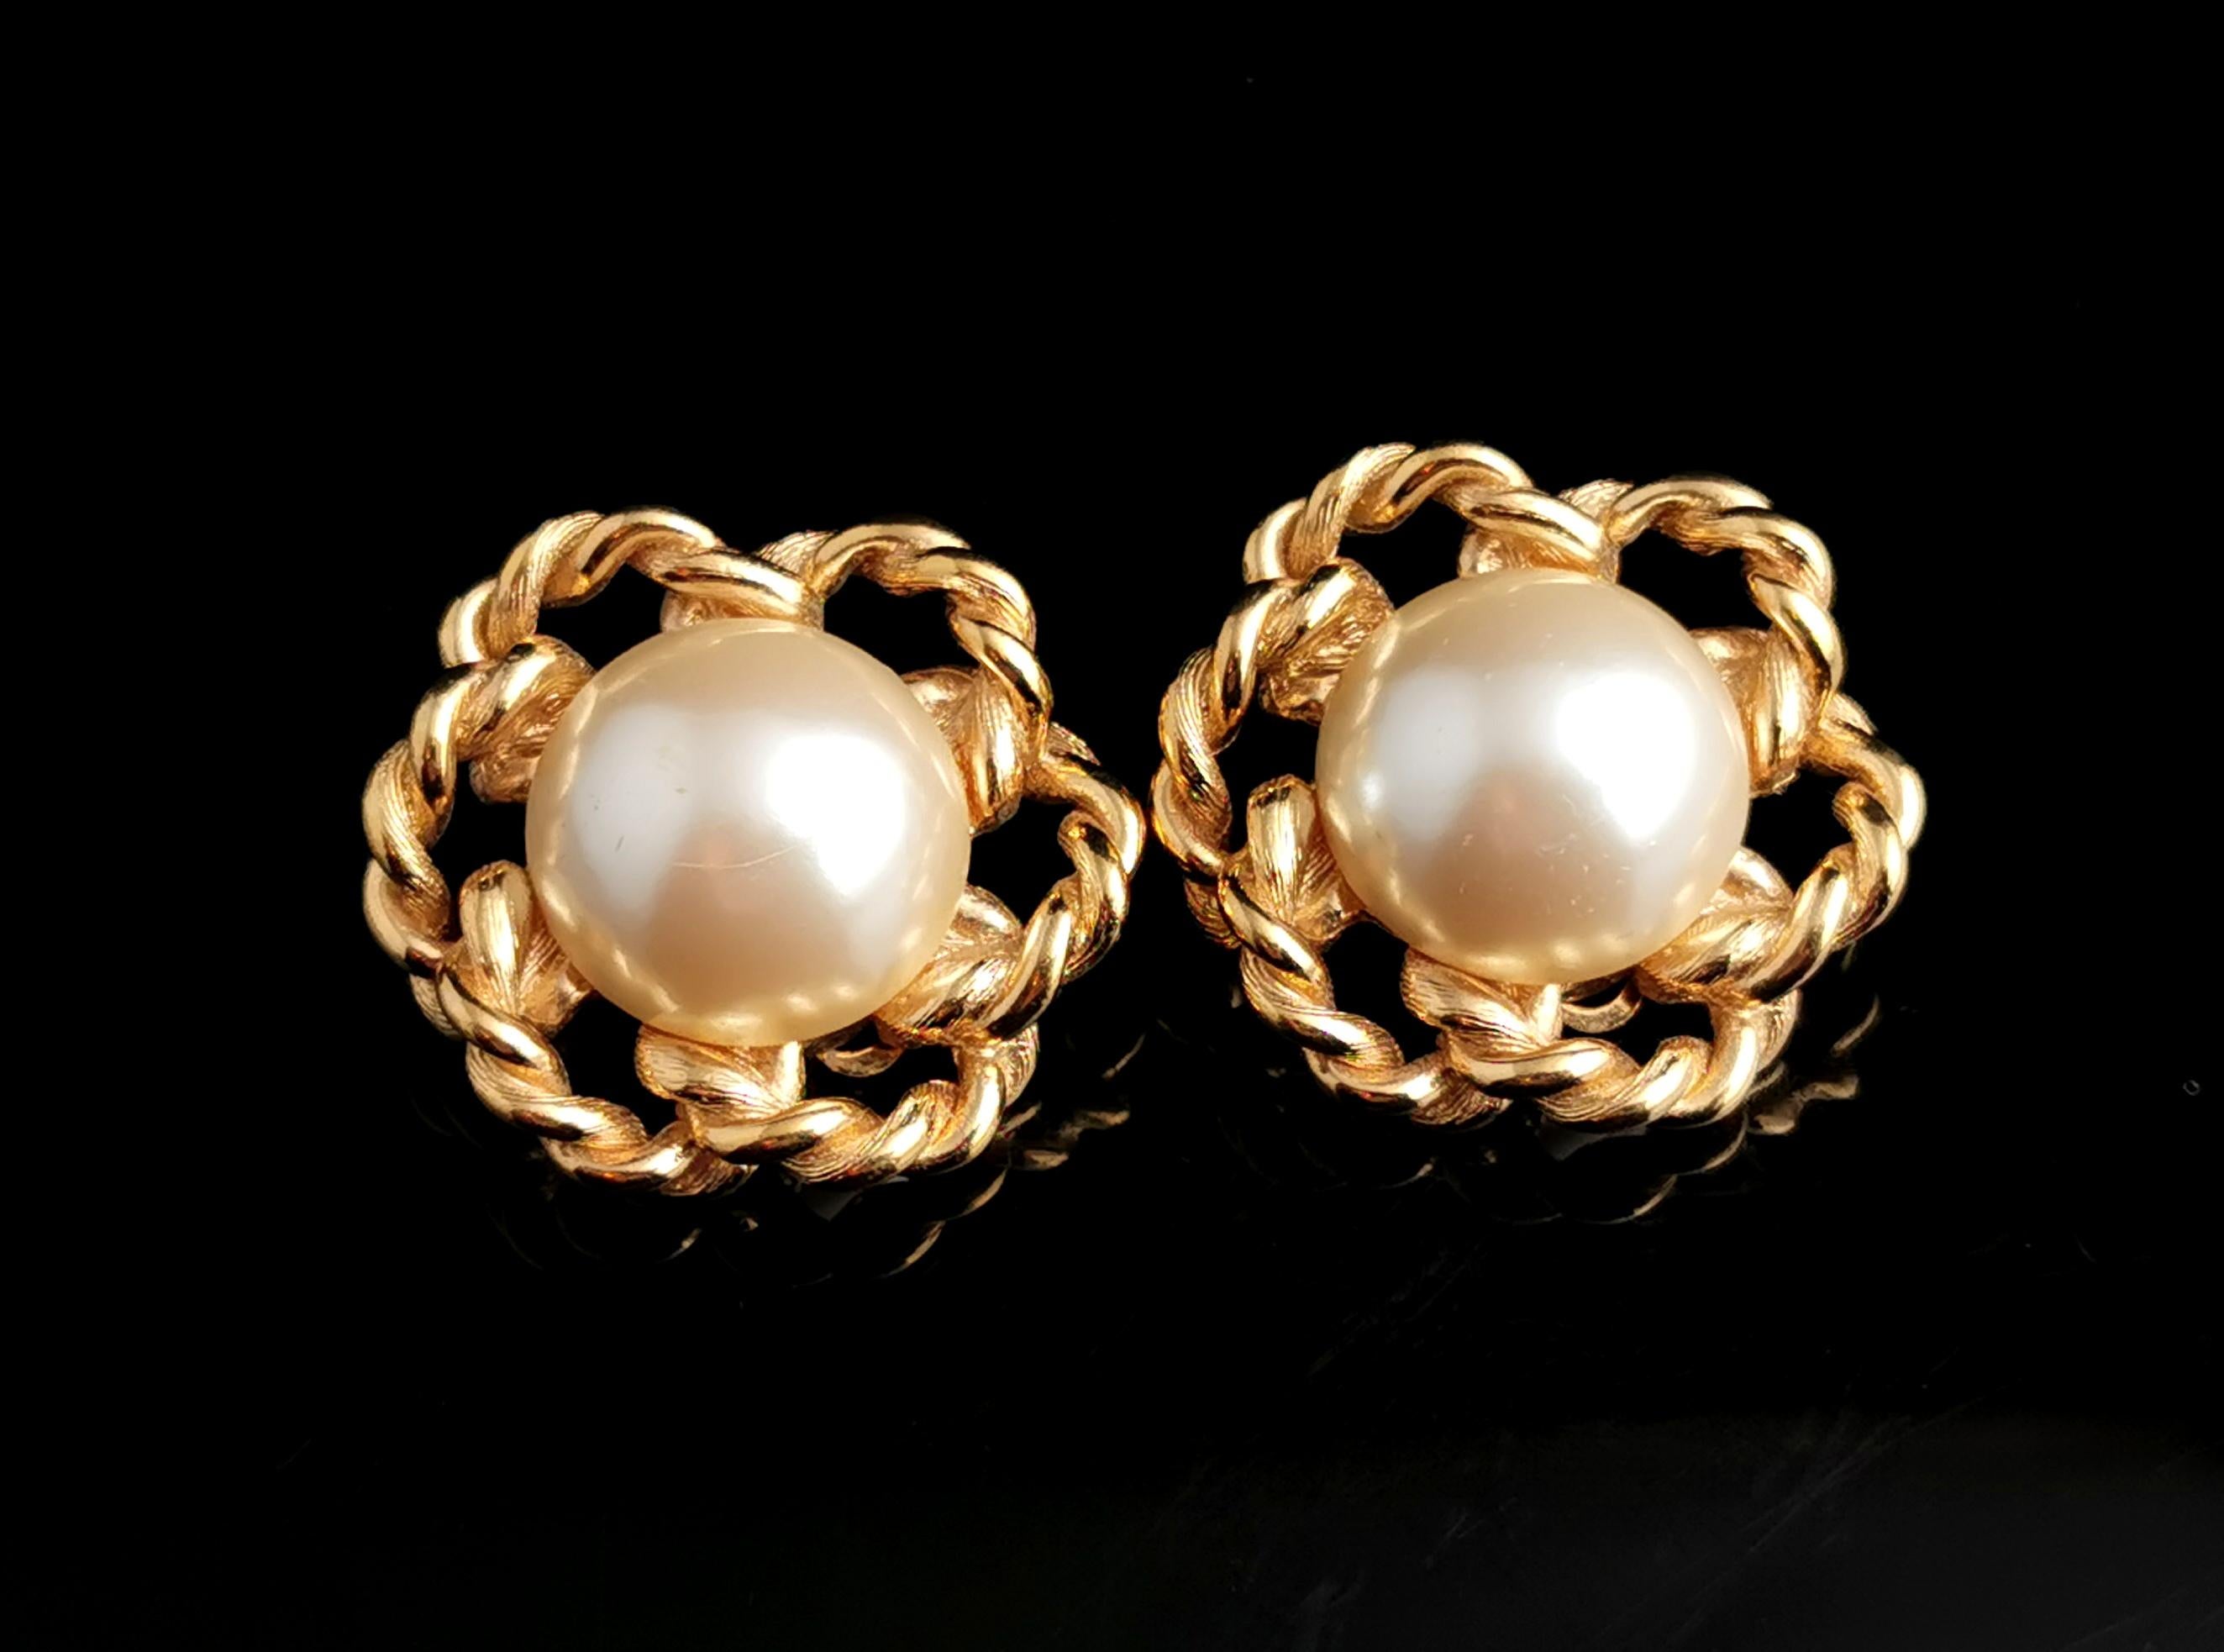 A fantastic pair of vintage Givenchy faux pearl clip on earrings.

A large pair of earrings in gold tone, lightly textured metal with an open work rope twist design.

Each earring is set with a large creamy lustrous faux pearl cabochon.

The